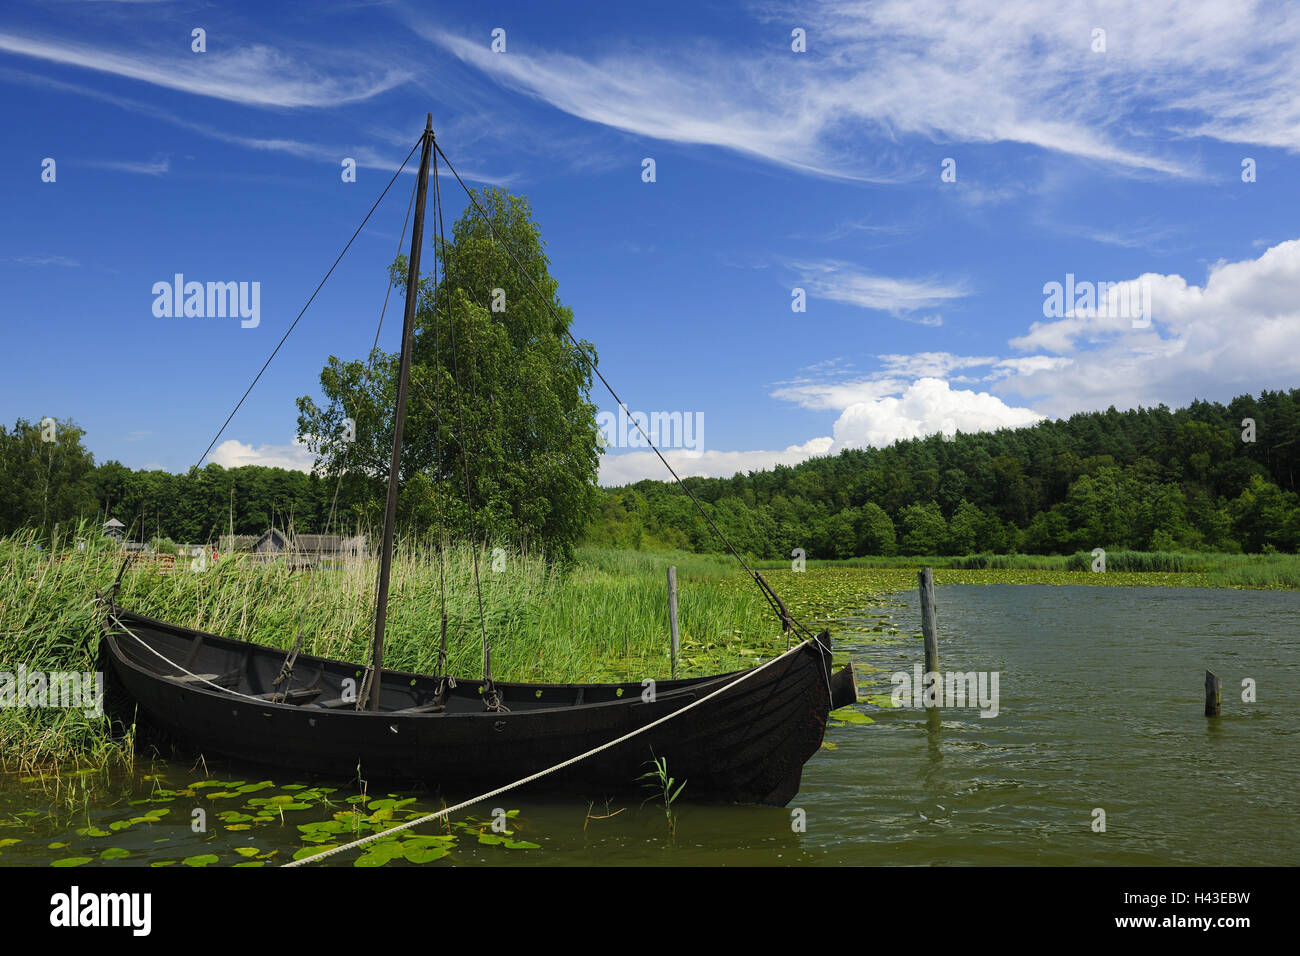 Germany, Mecklenburg-West Pomerania, Groß Raden, open-air museum, wooden boat, no property release, Stock Photo